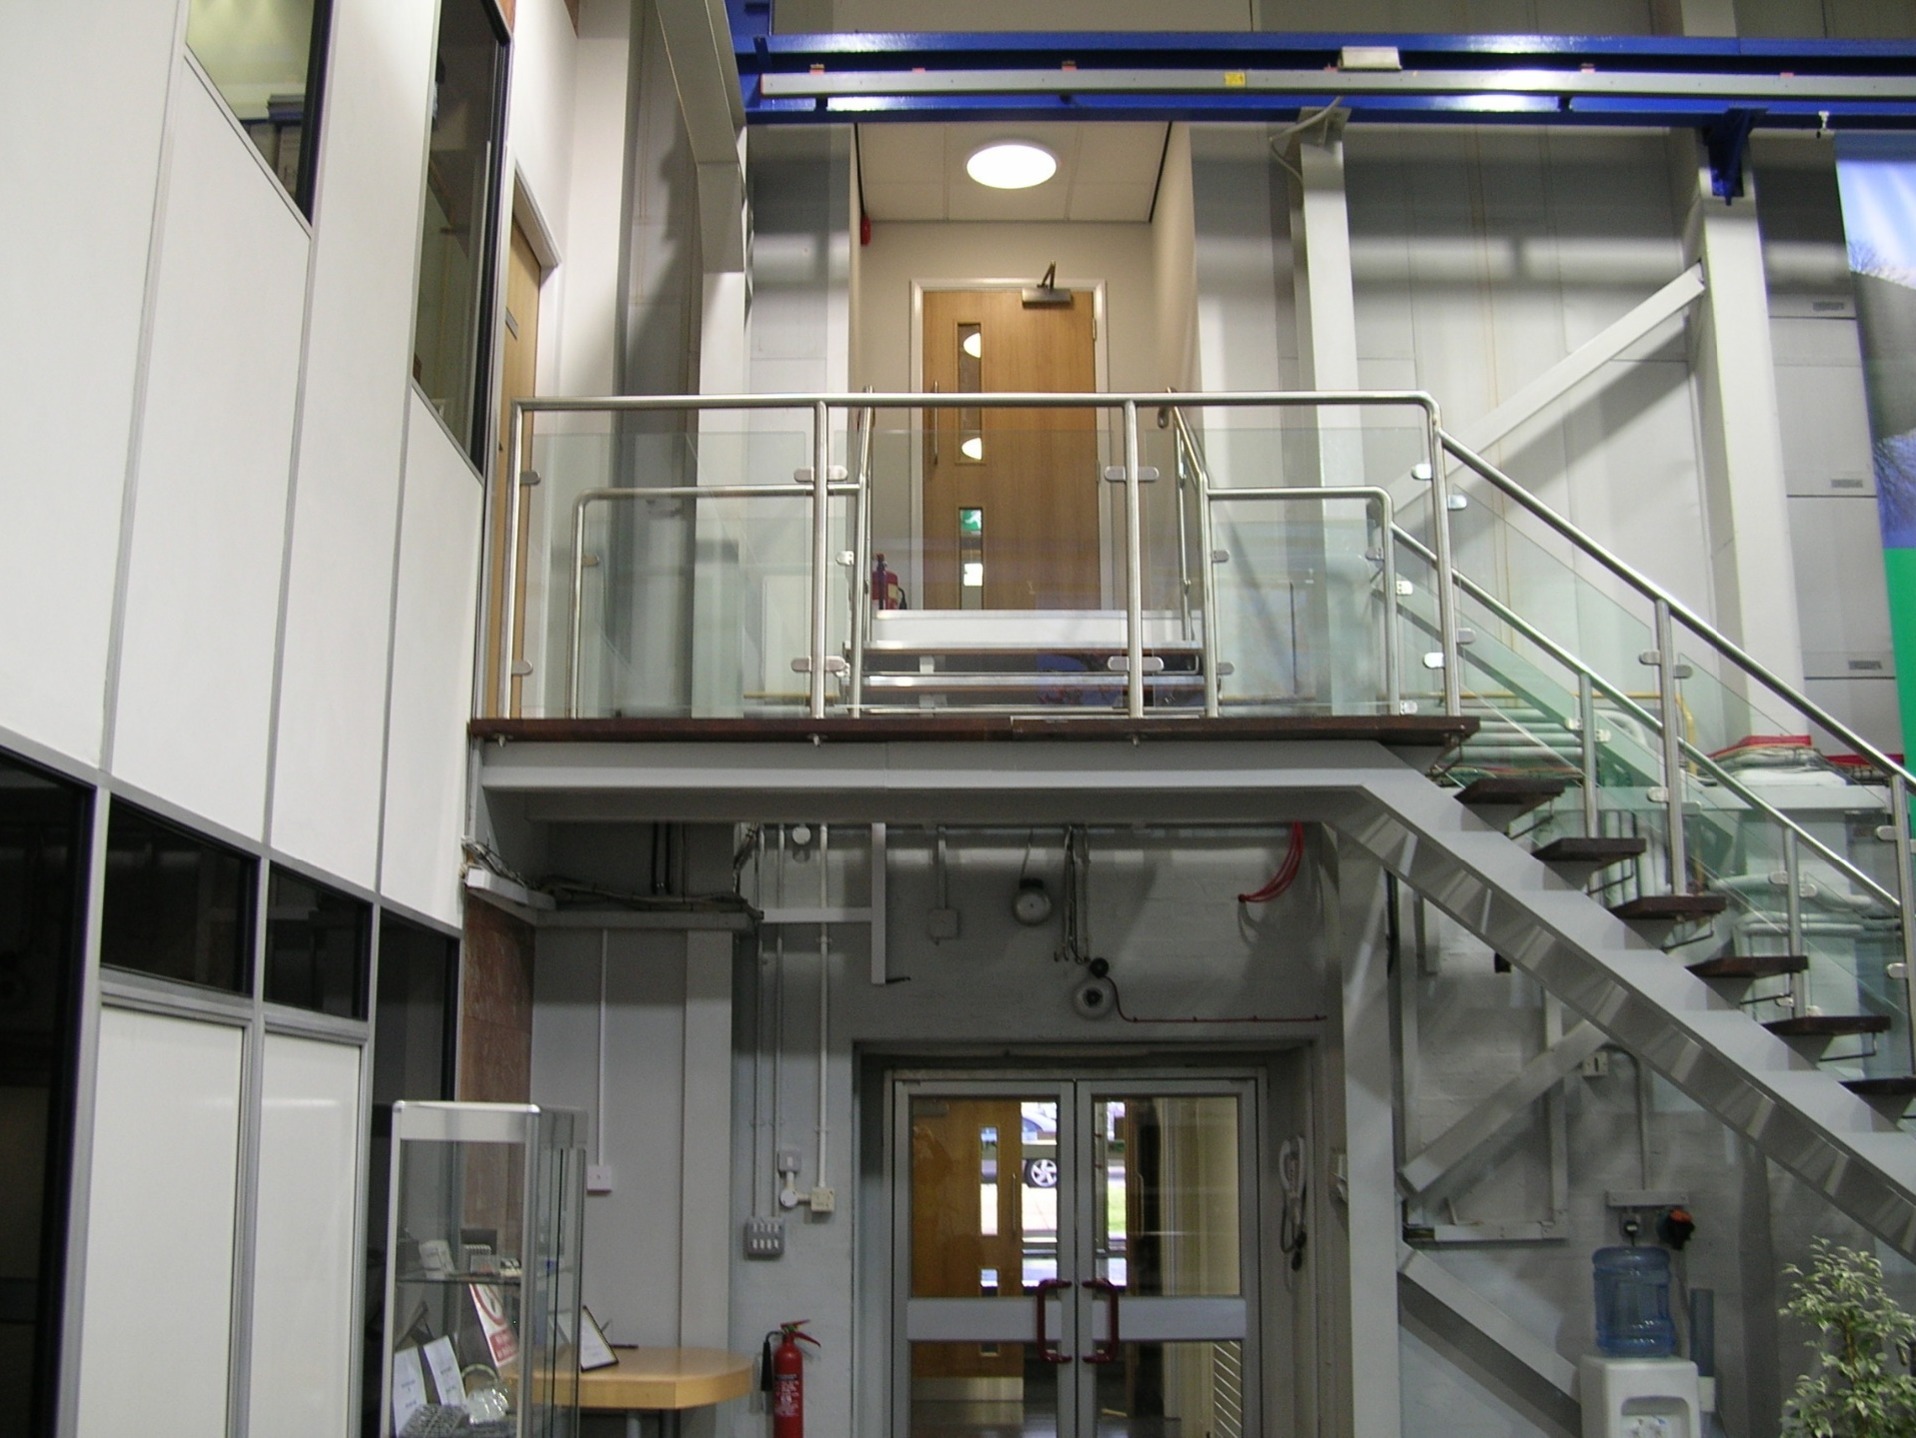 Stainless Steel & Glass Stair Balustrade and Handrail